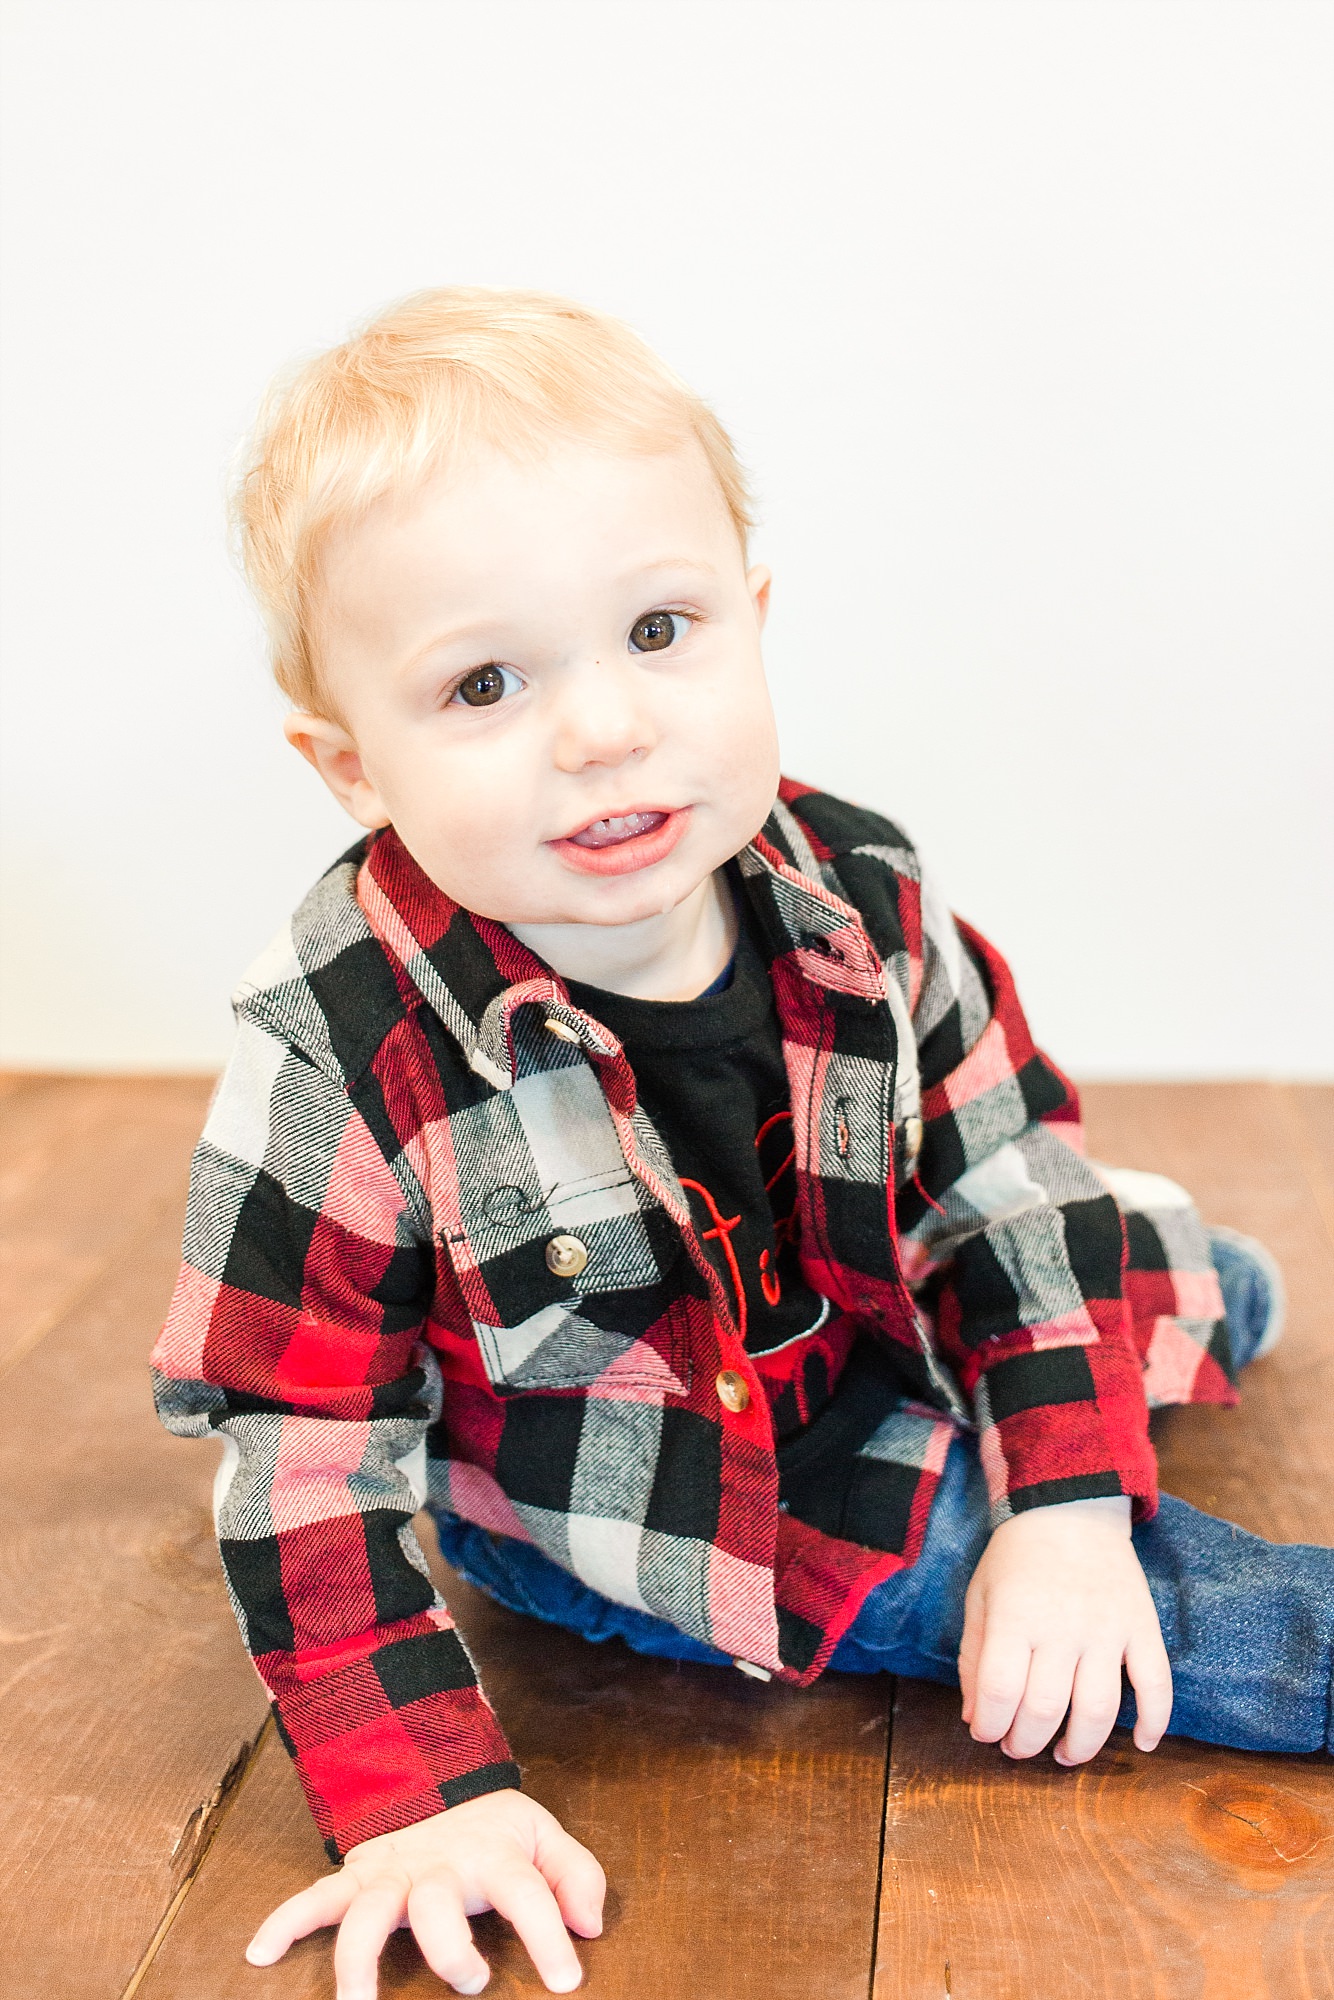 One year old in Flannel smiles at the camera